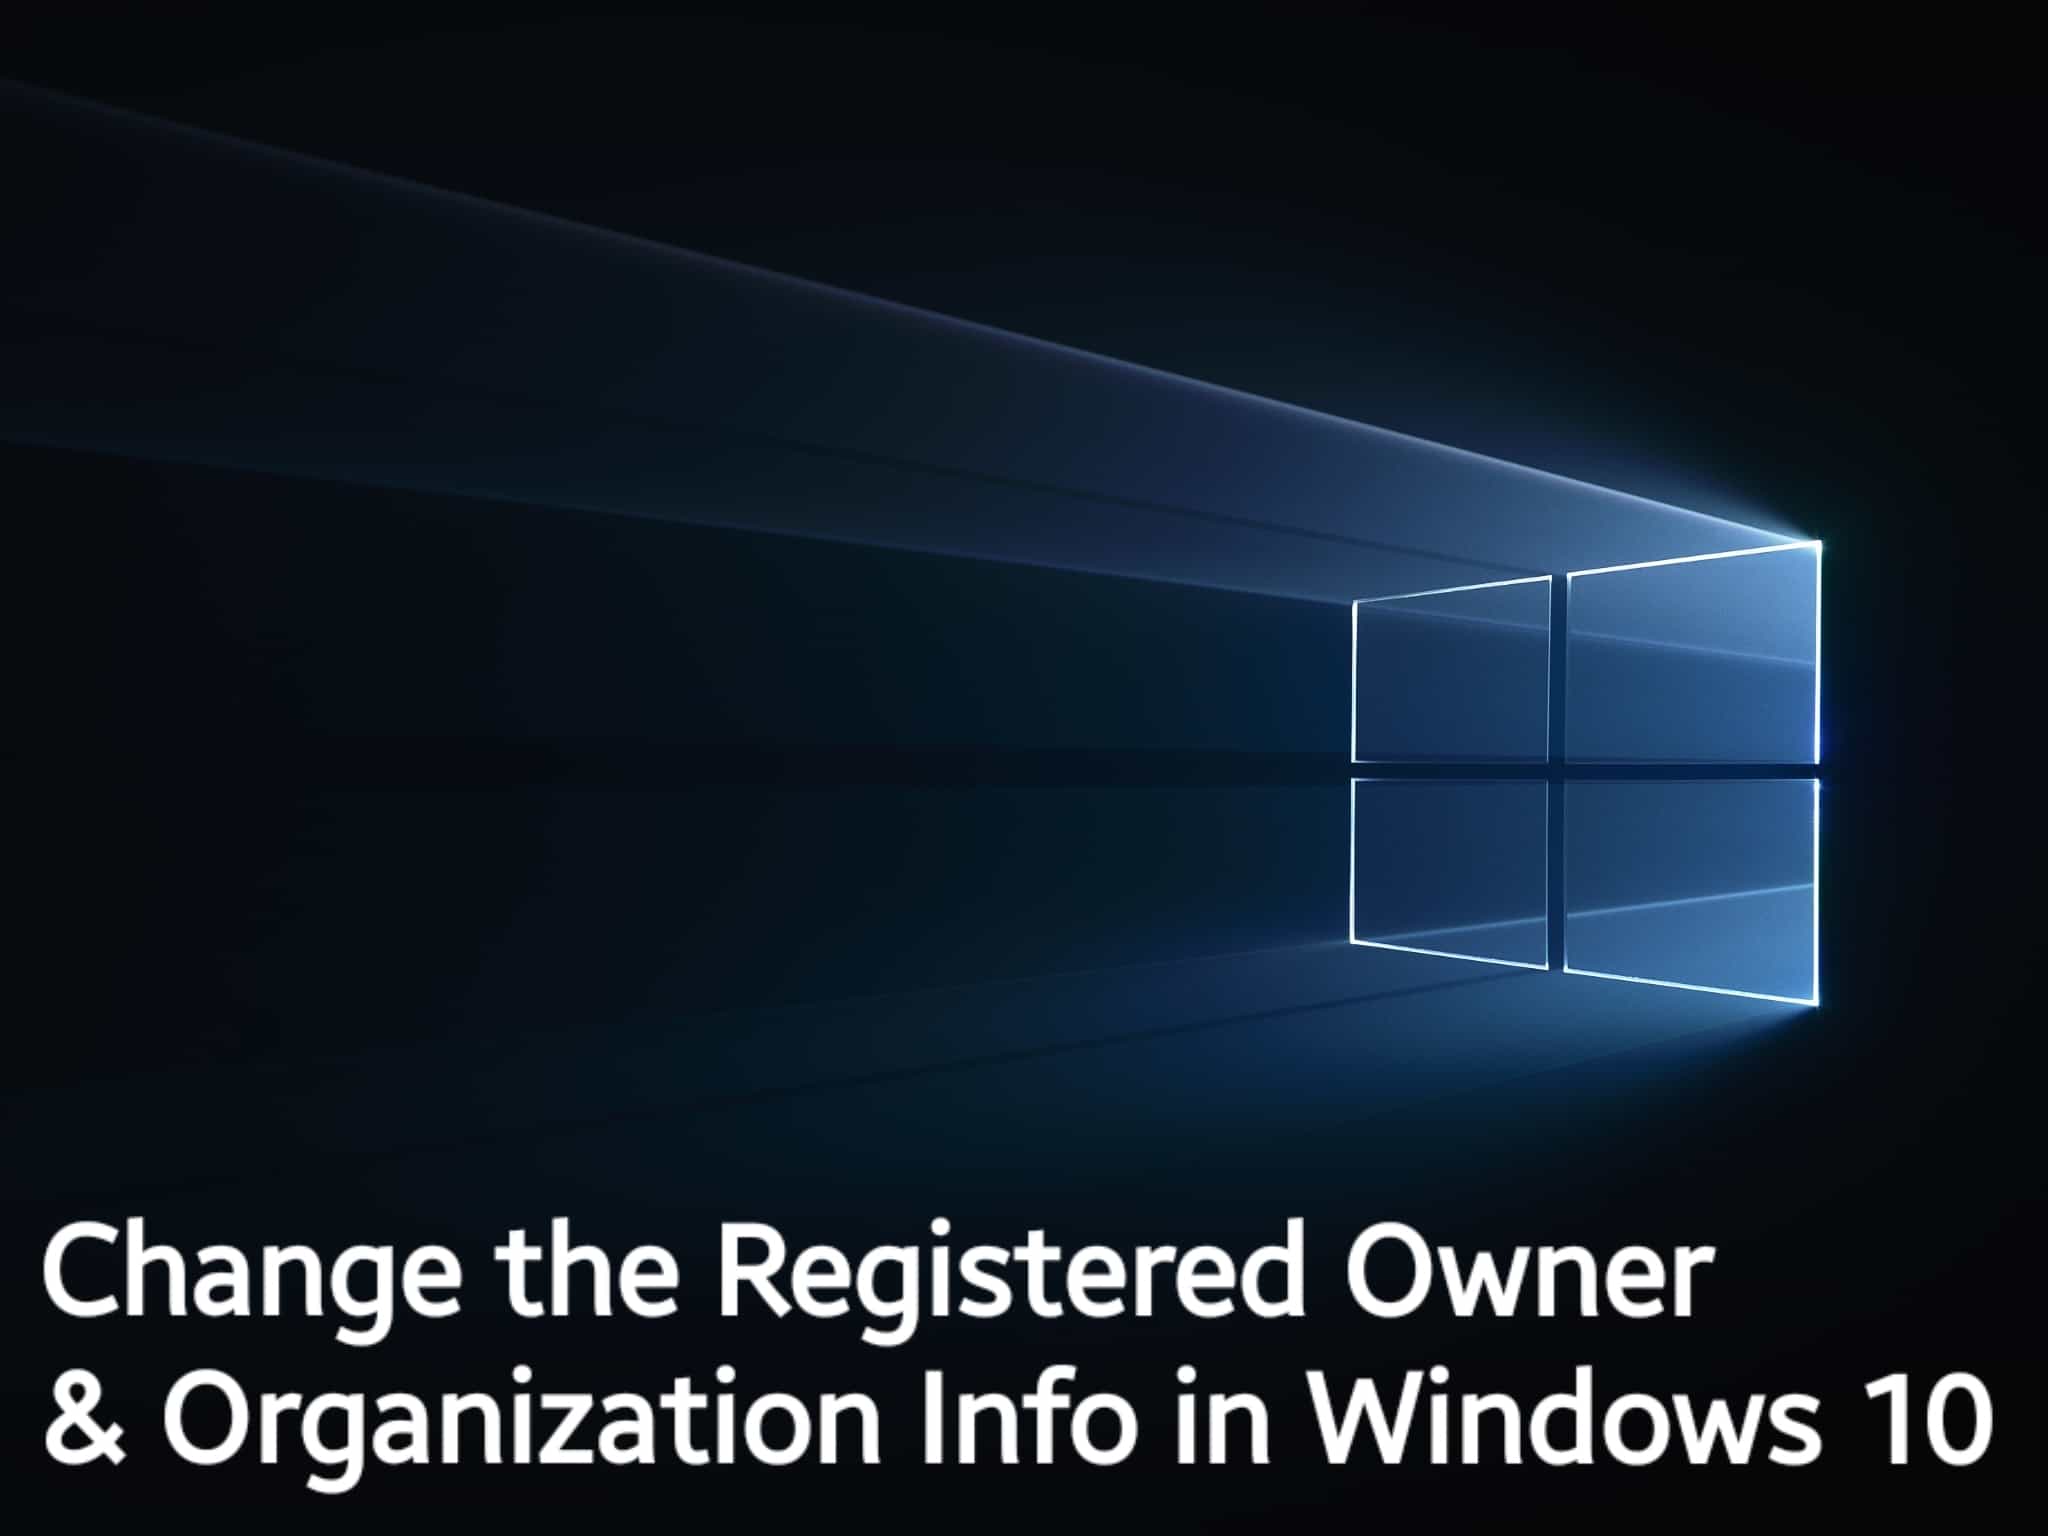 How to change the Registered Owner & Organization Info in Windows 10